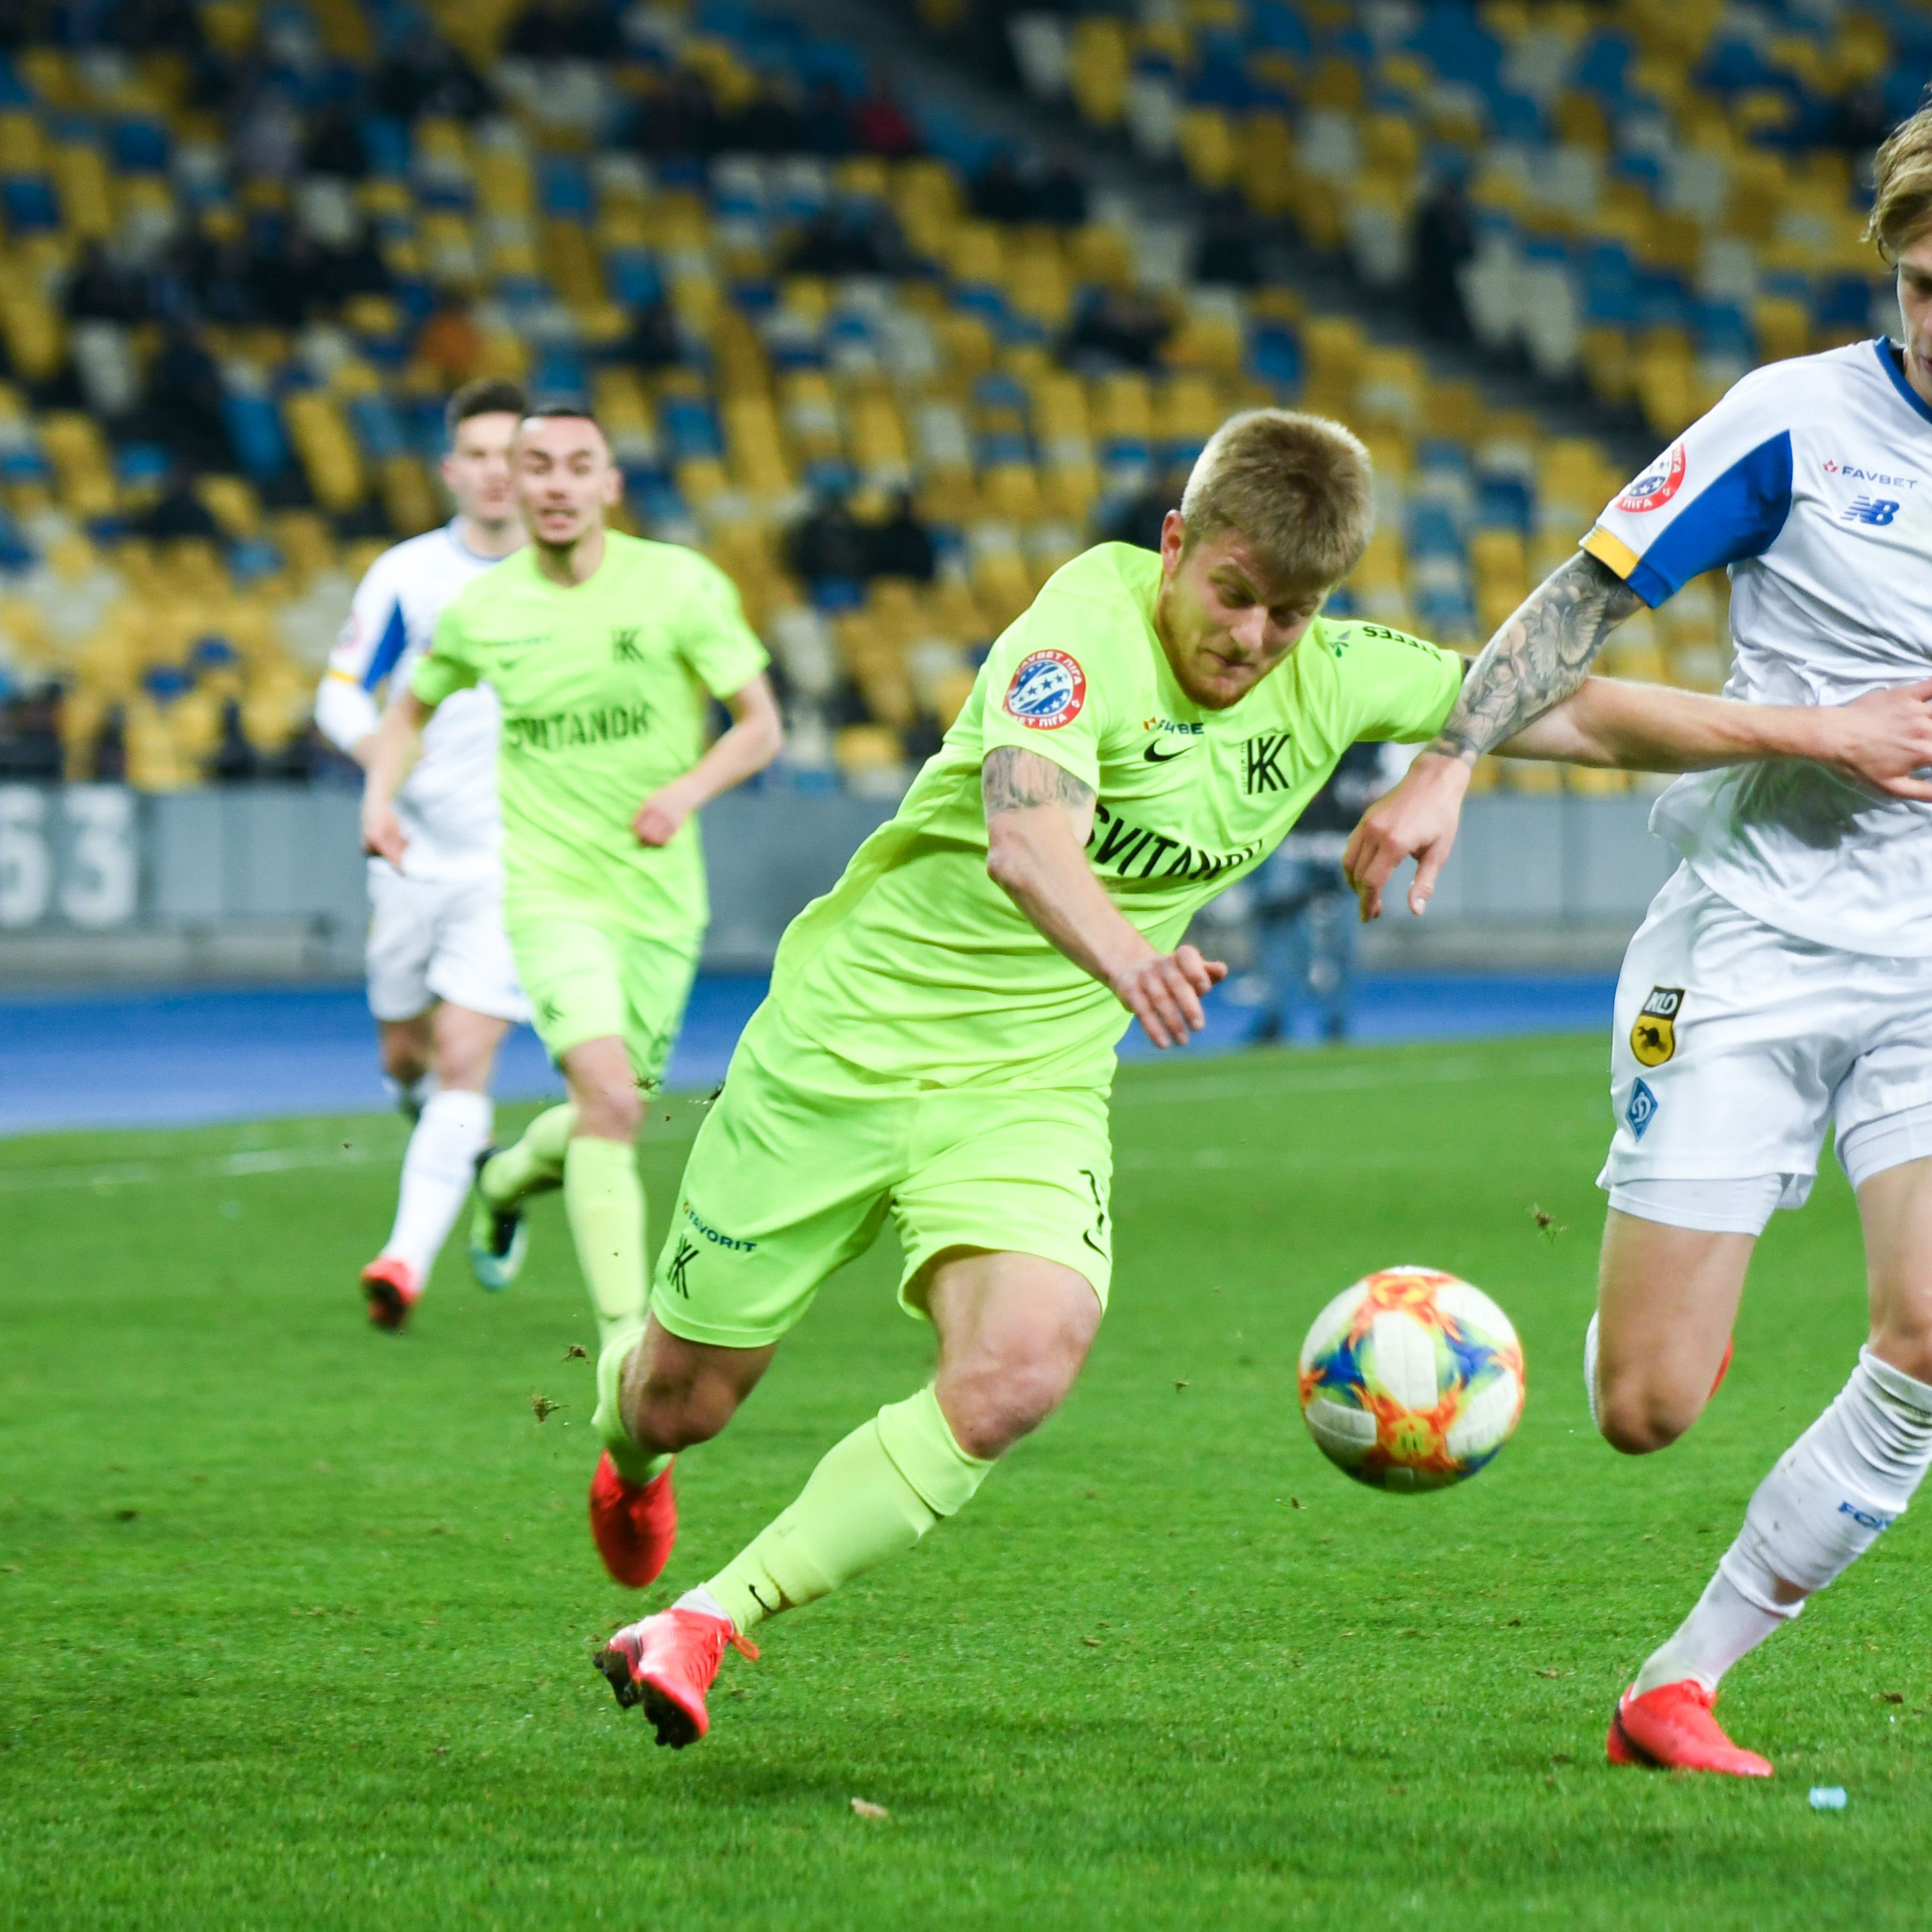 Artem Shabanov: “I always want to play in the starting lineup”